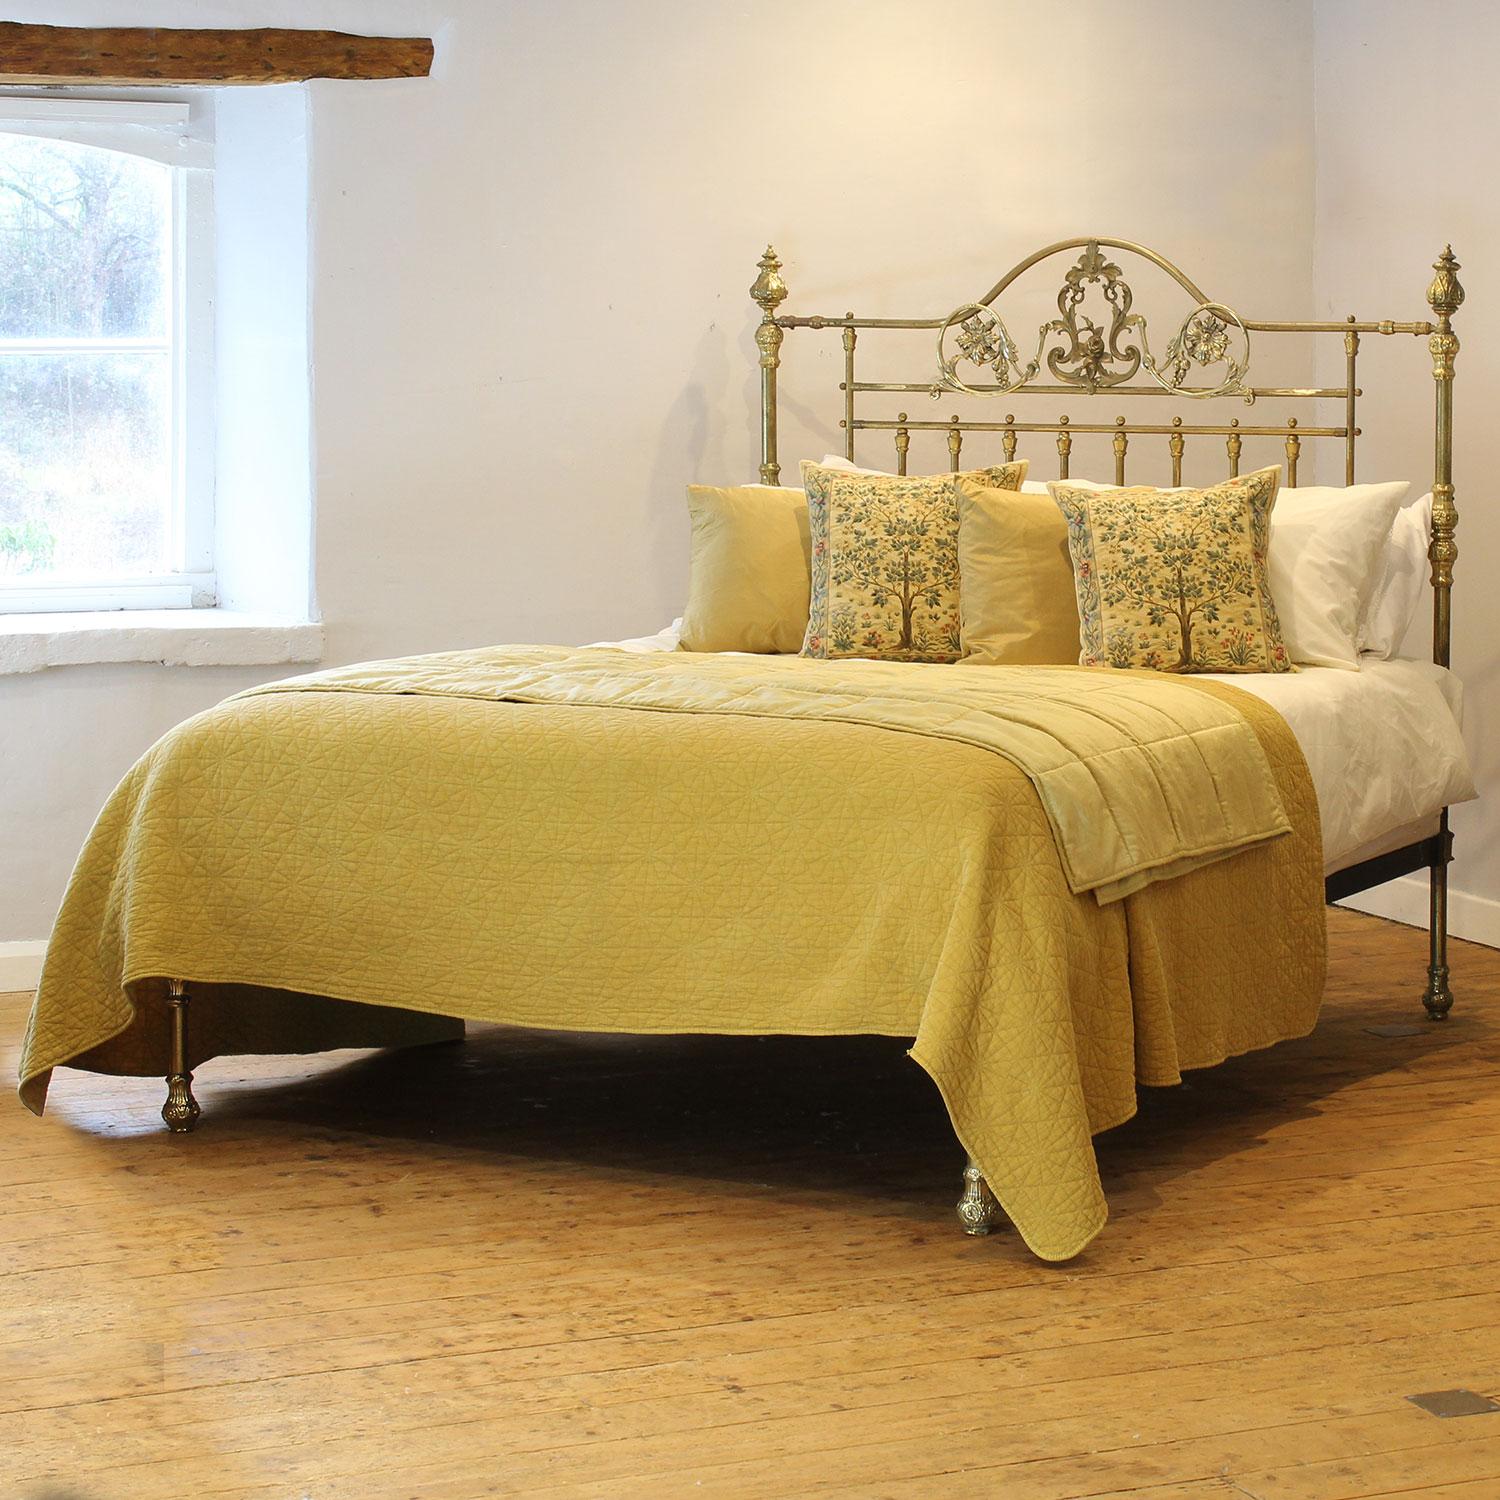 A superb top quality all brass antique platform bed with serpentine brass top rail, ornate floral castings, decorative brass fittings and etched posts.

This bed will accept a US Queen Size 60 inch wide (or UK King Size 5ft) base and mattress